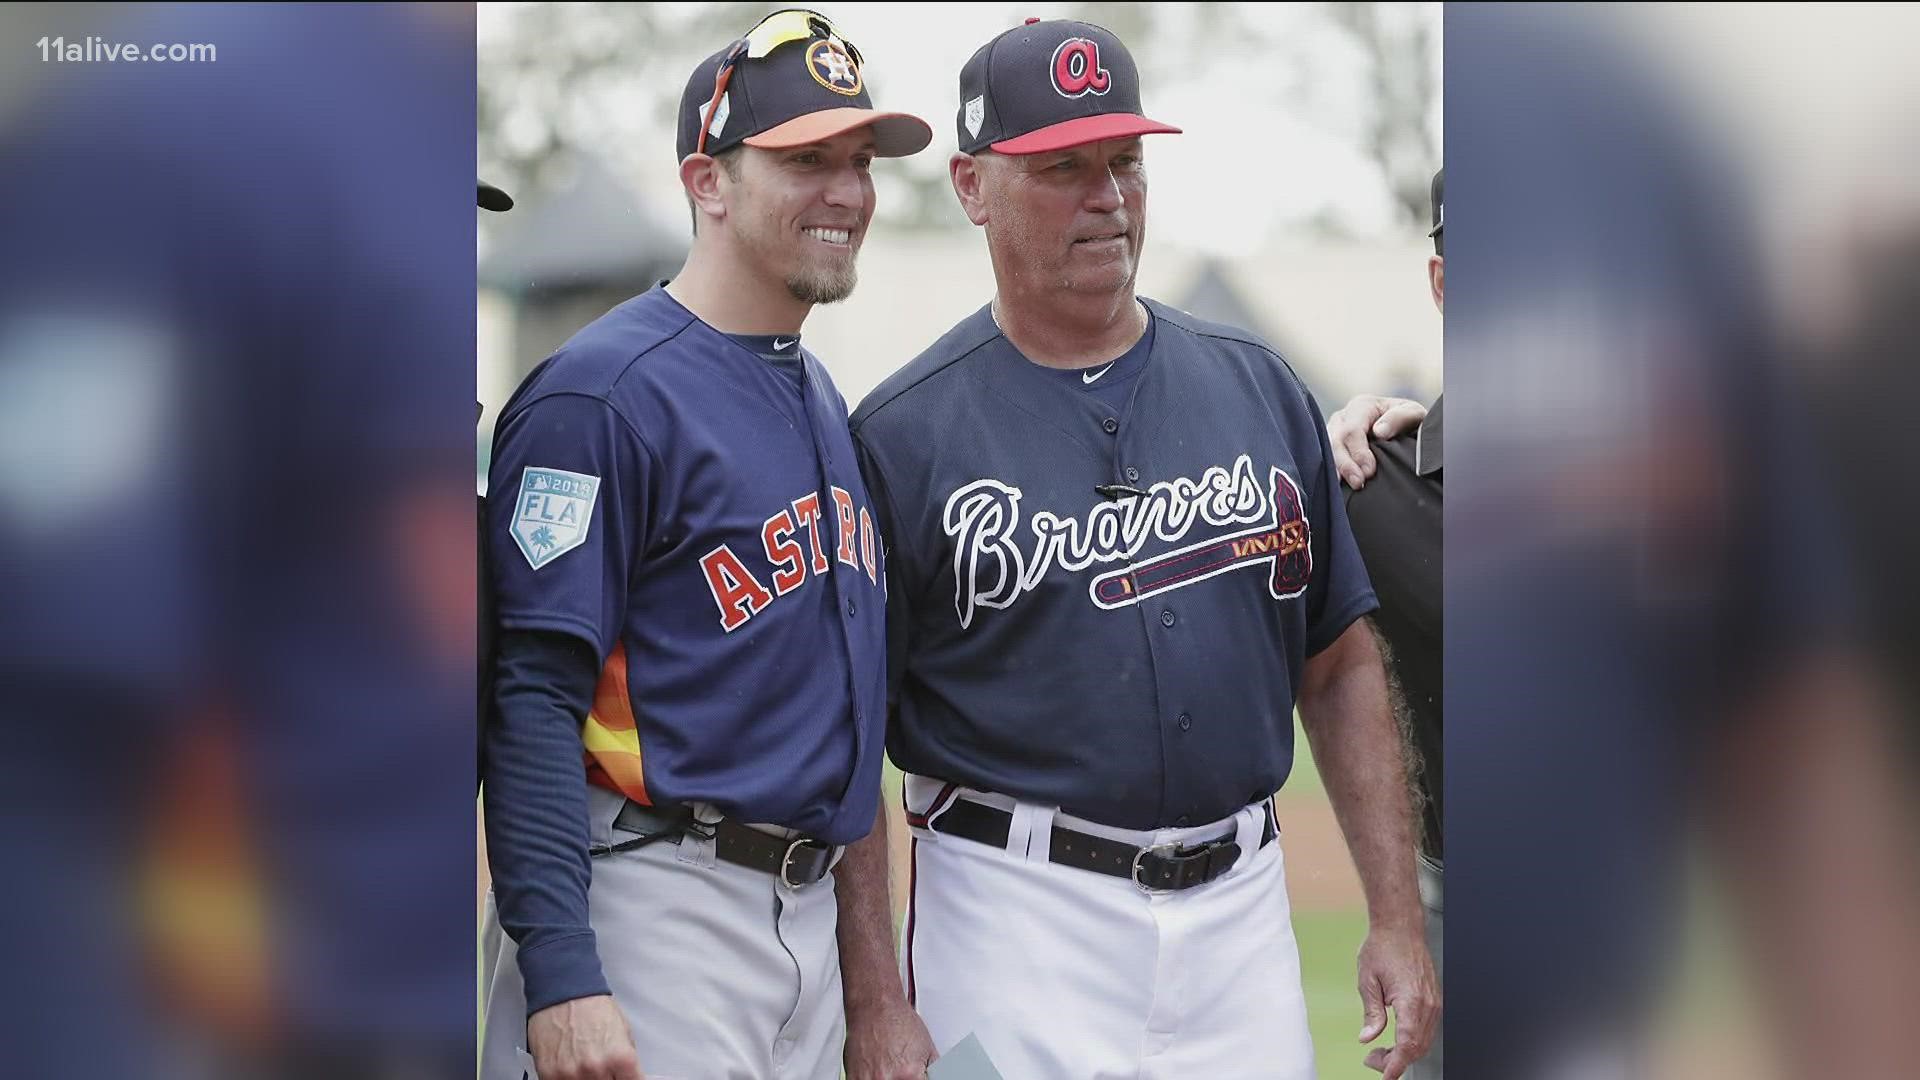 Brian Snitker is the manager of the Braves and his son, Troy, is a hitting coach for Houston.